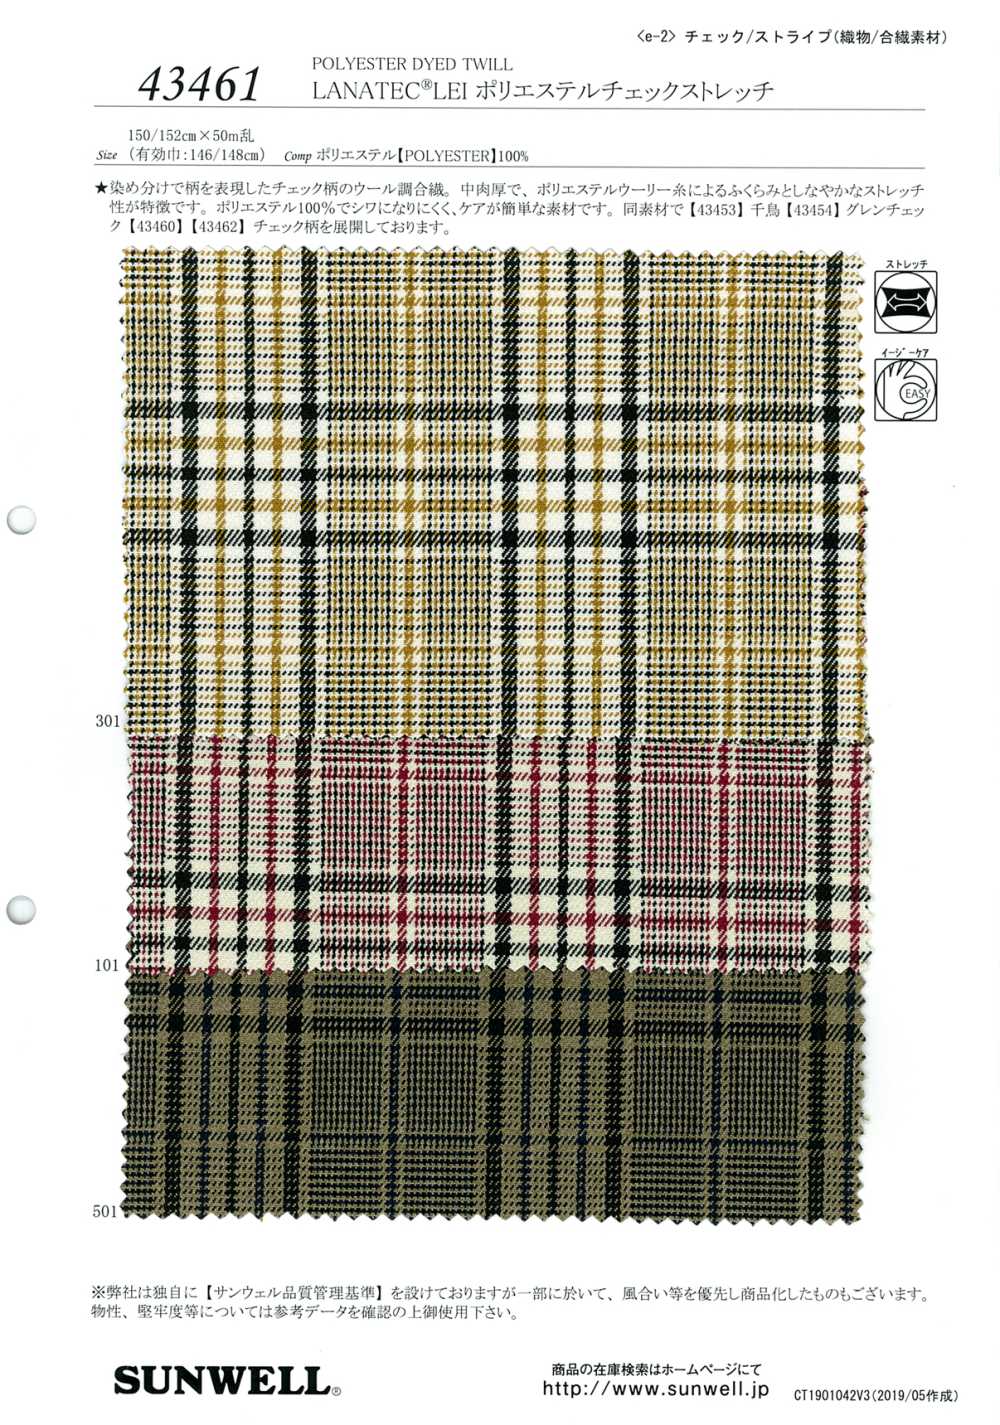 43461 [OUTLET] LANATEC (R) LEI Polyester Check Stretch[Textilgewebe] SUNWELL